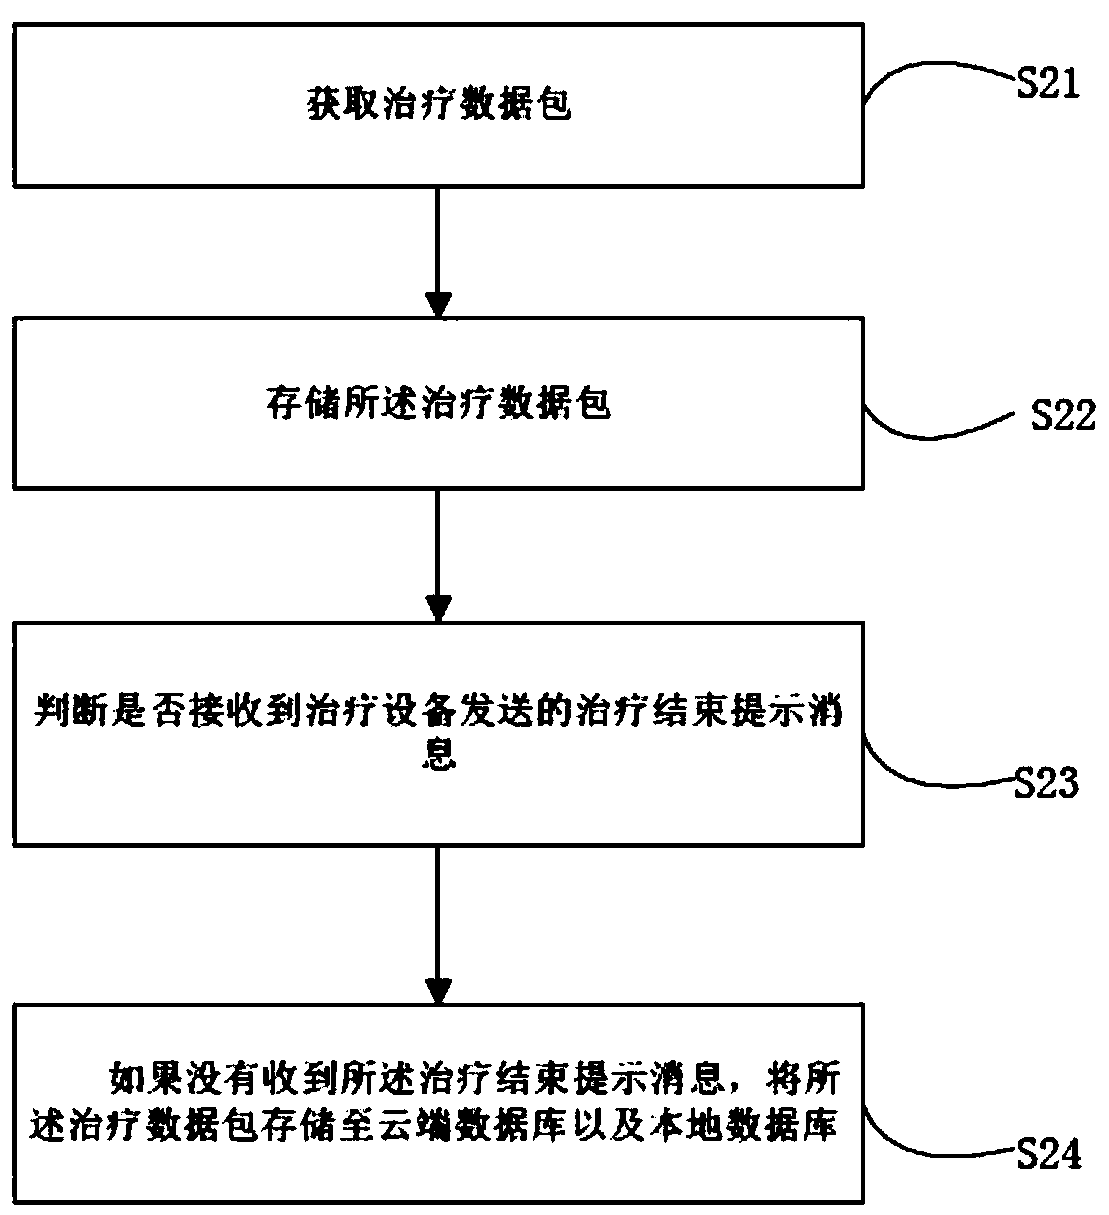 Dental clinical therapeutic data management method and device